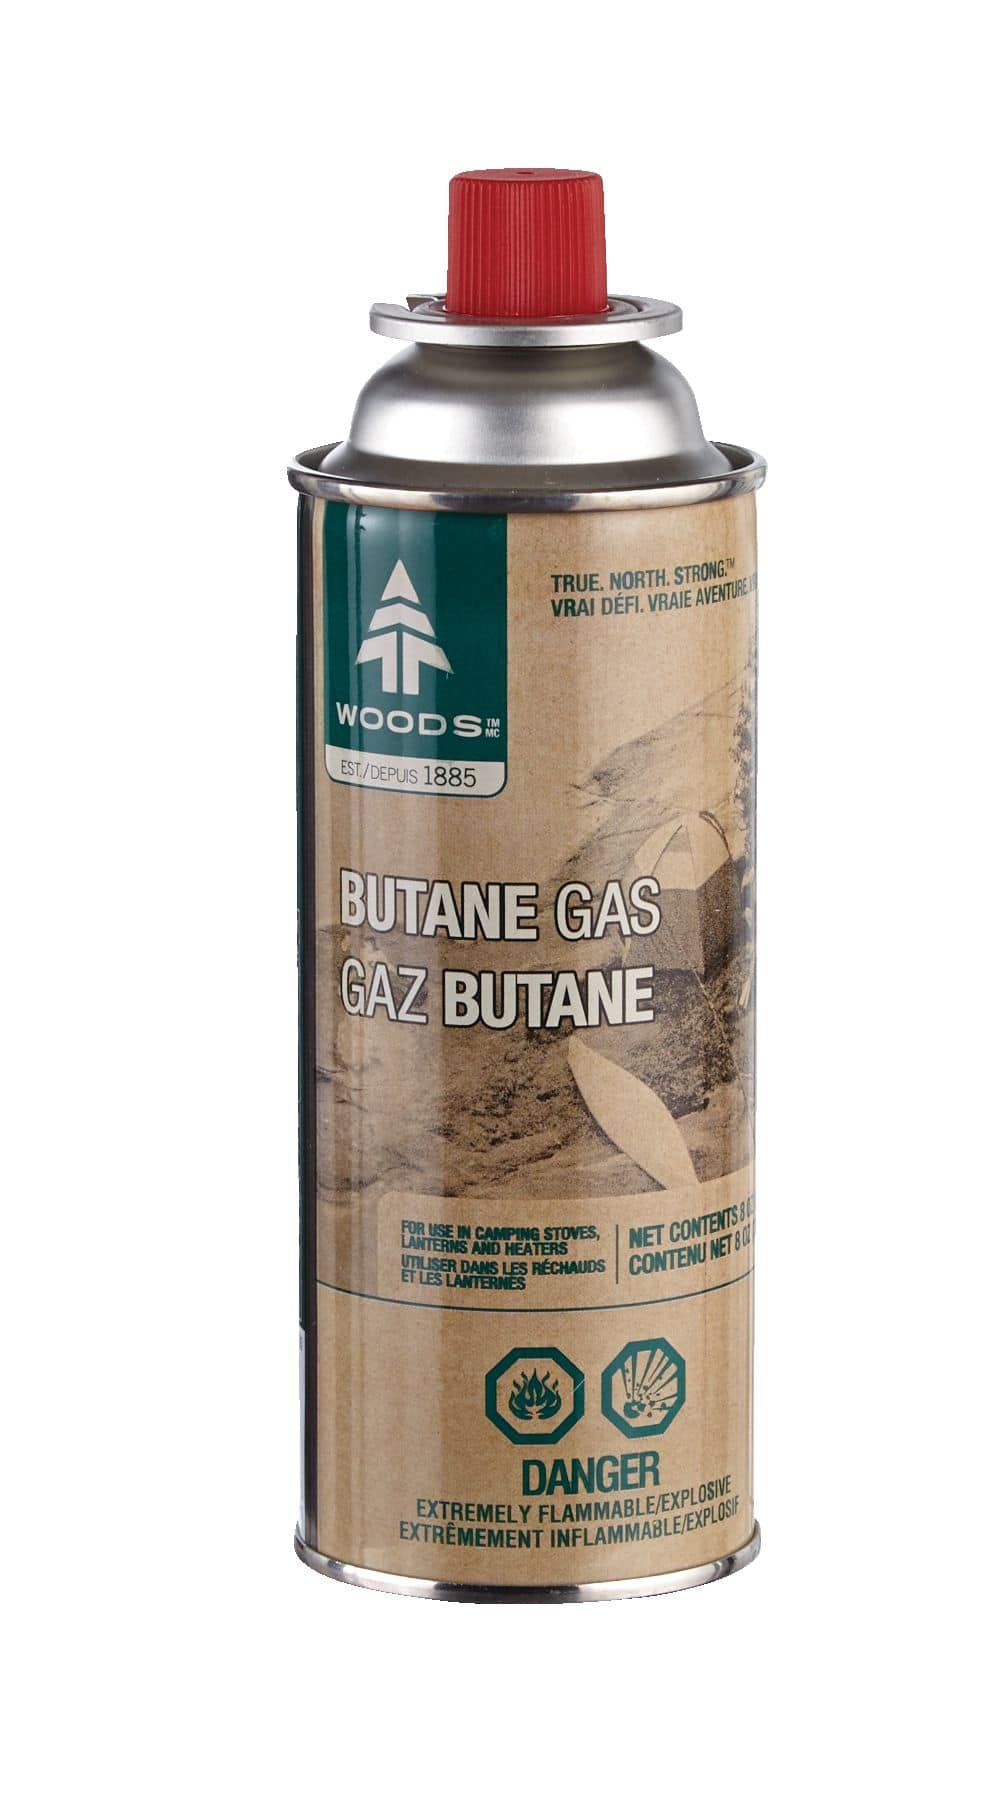 https://media-www.canadiantire.ca/product/playing/camping/camping-accessories/0762639/woods-butane-fuel-227g-b912b8d2-f9cd-49e0-a621-59ce02112bb0-jpgrendition.jpg